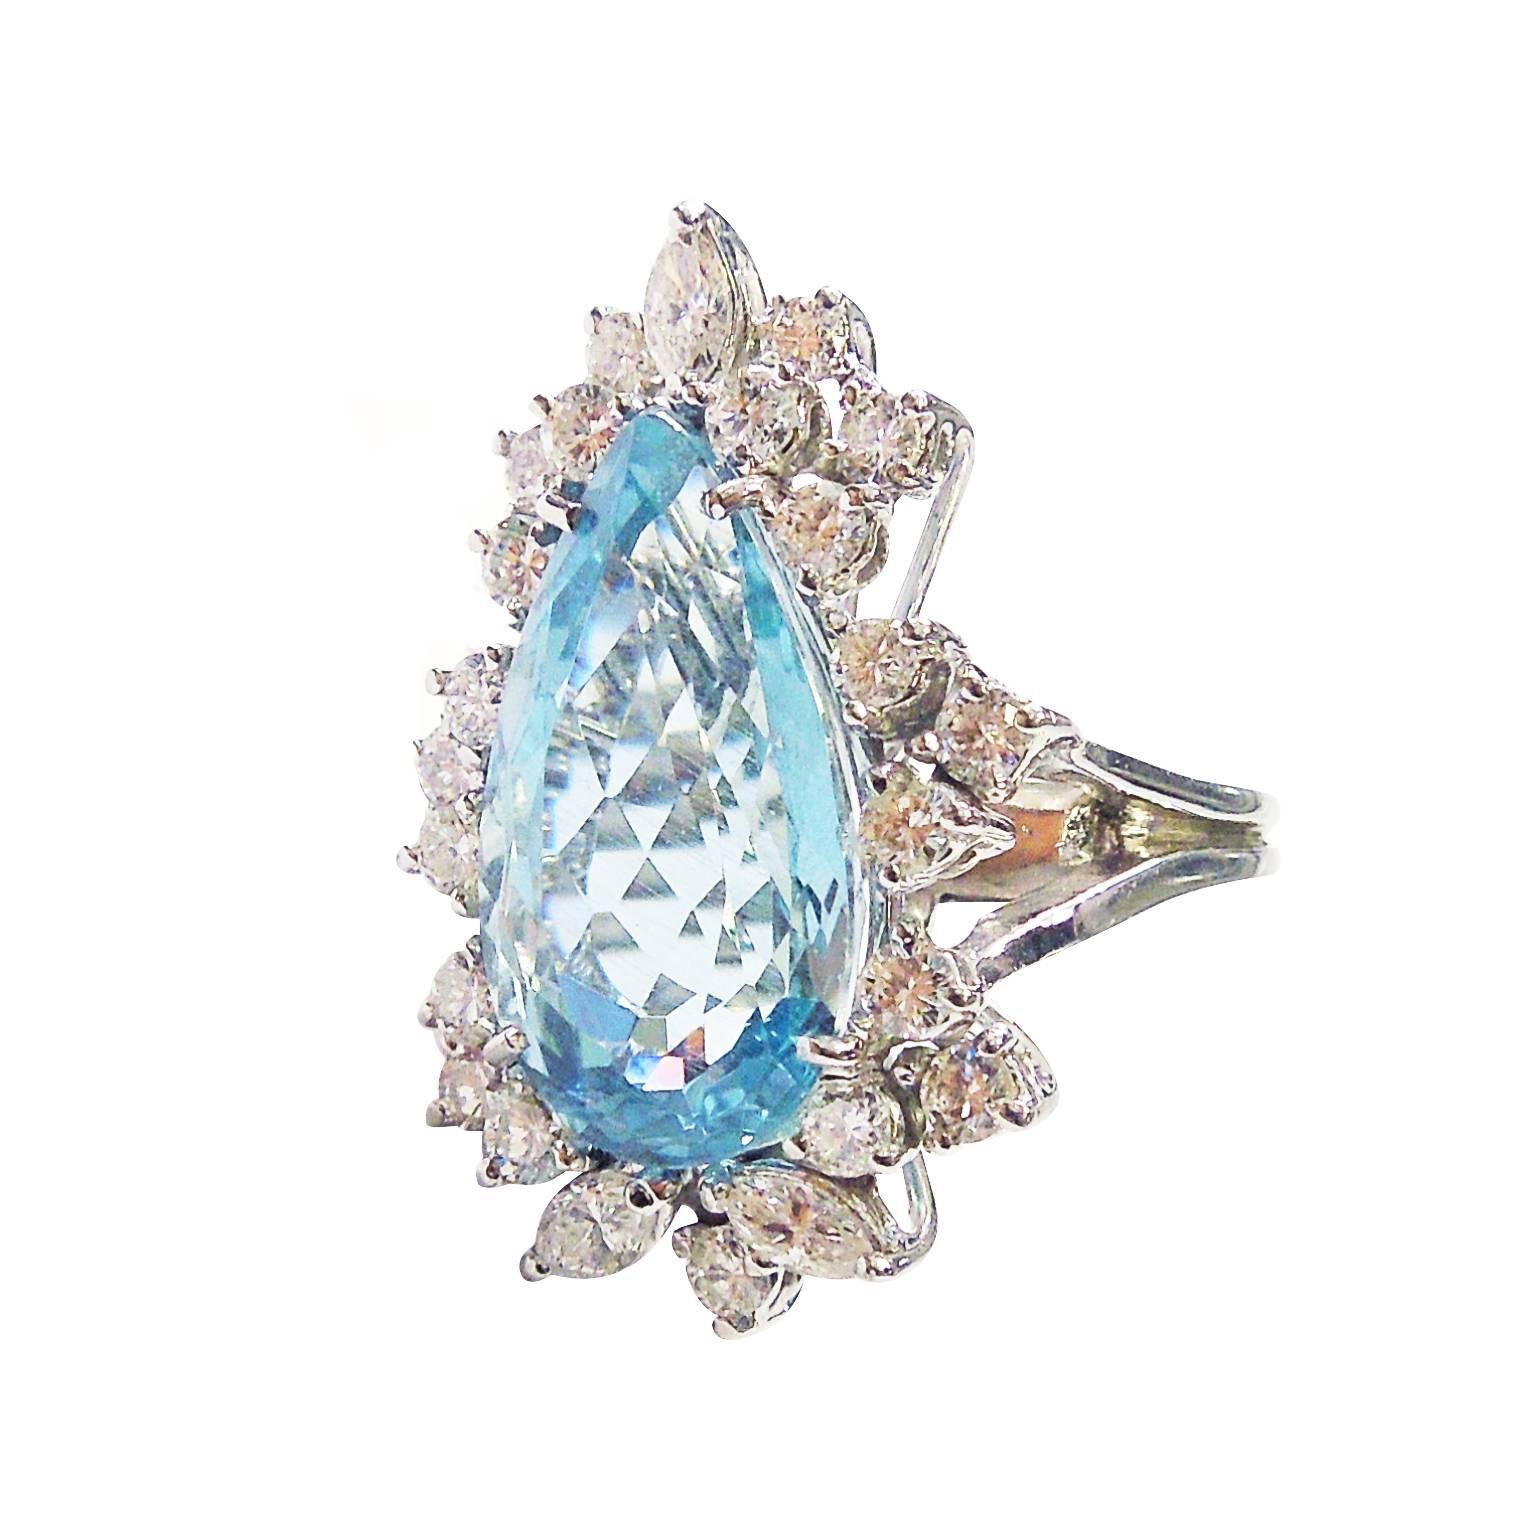 14K White Gold Ring with Pear Shape Aquamarine center and Diamonds

6.00ct. Aquamarine Center, pear shape.

1.20ct. apprx. diamonds  

Face of ring is 1 inch x 0.7 inch

Currently size 5.75. Can be sized.